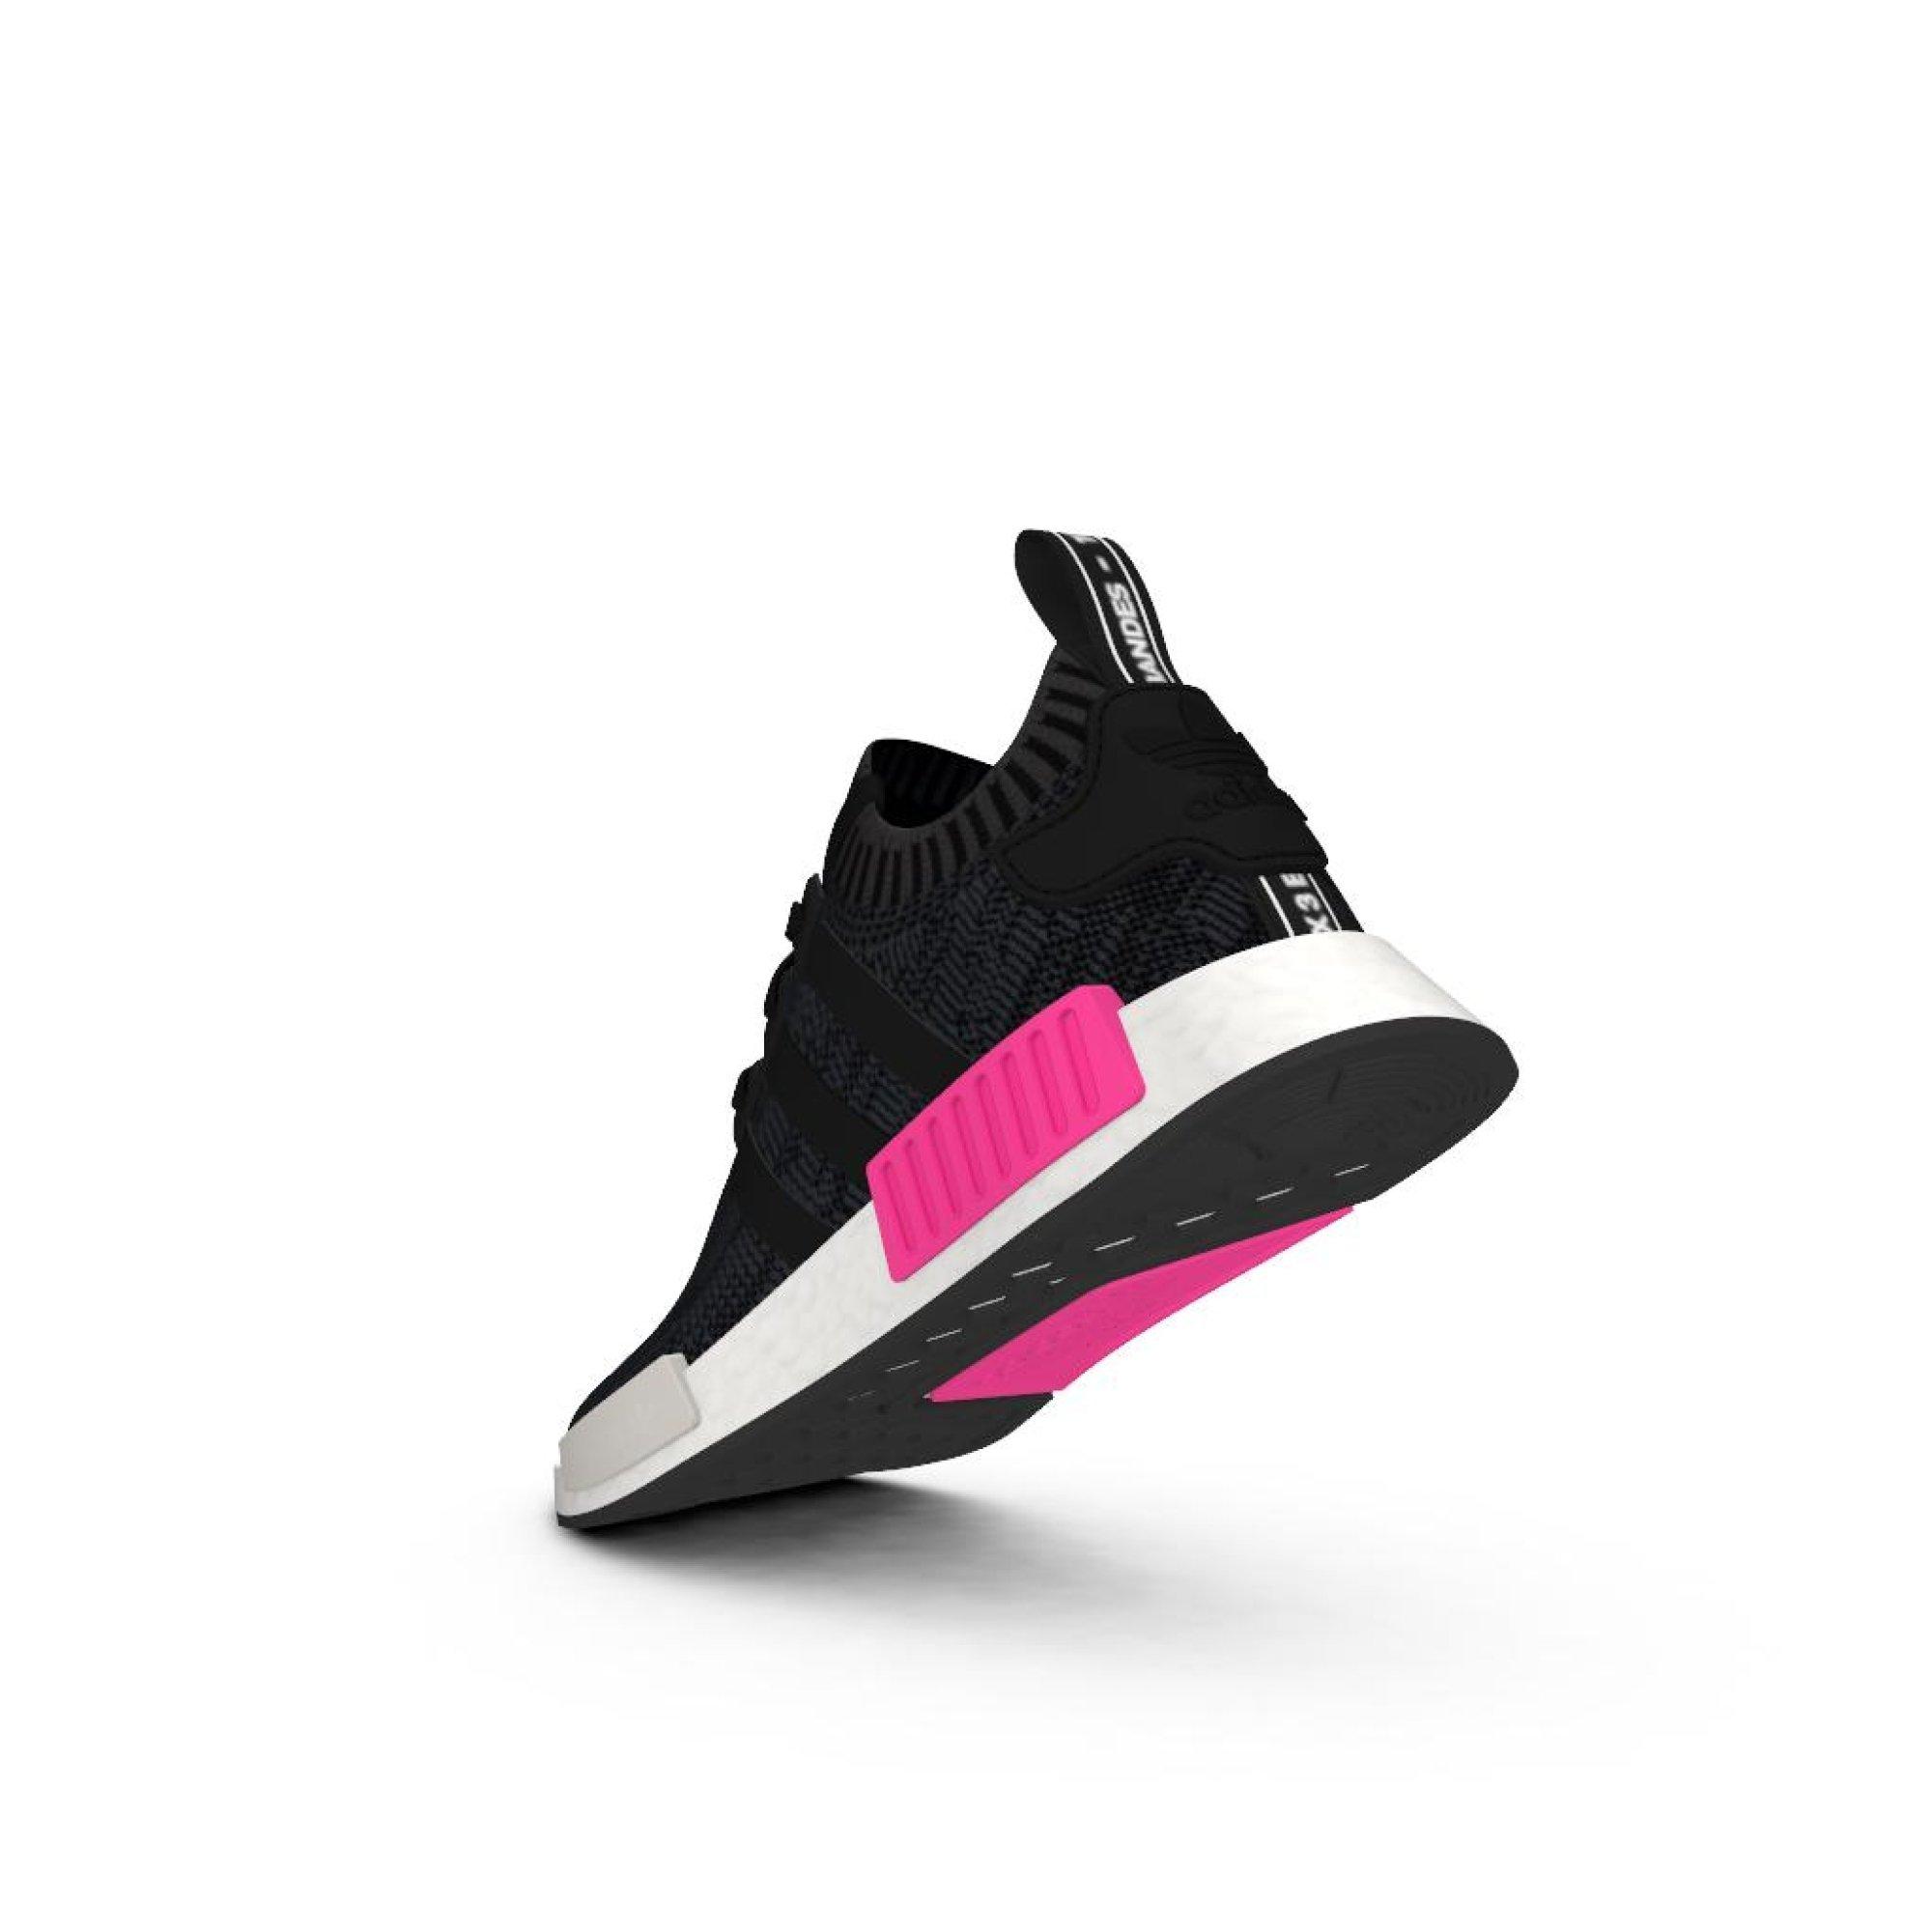 nmd r1 black and pink